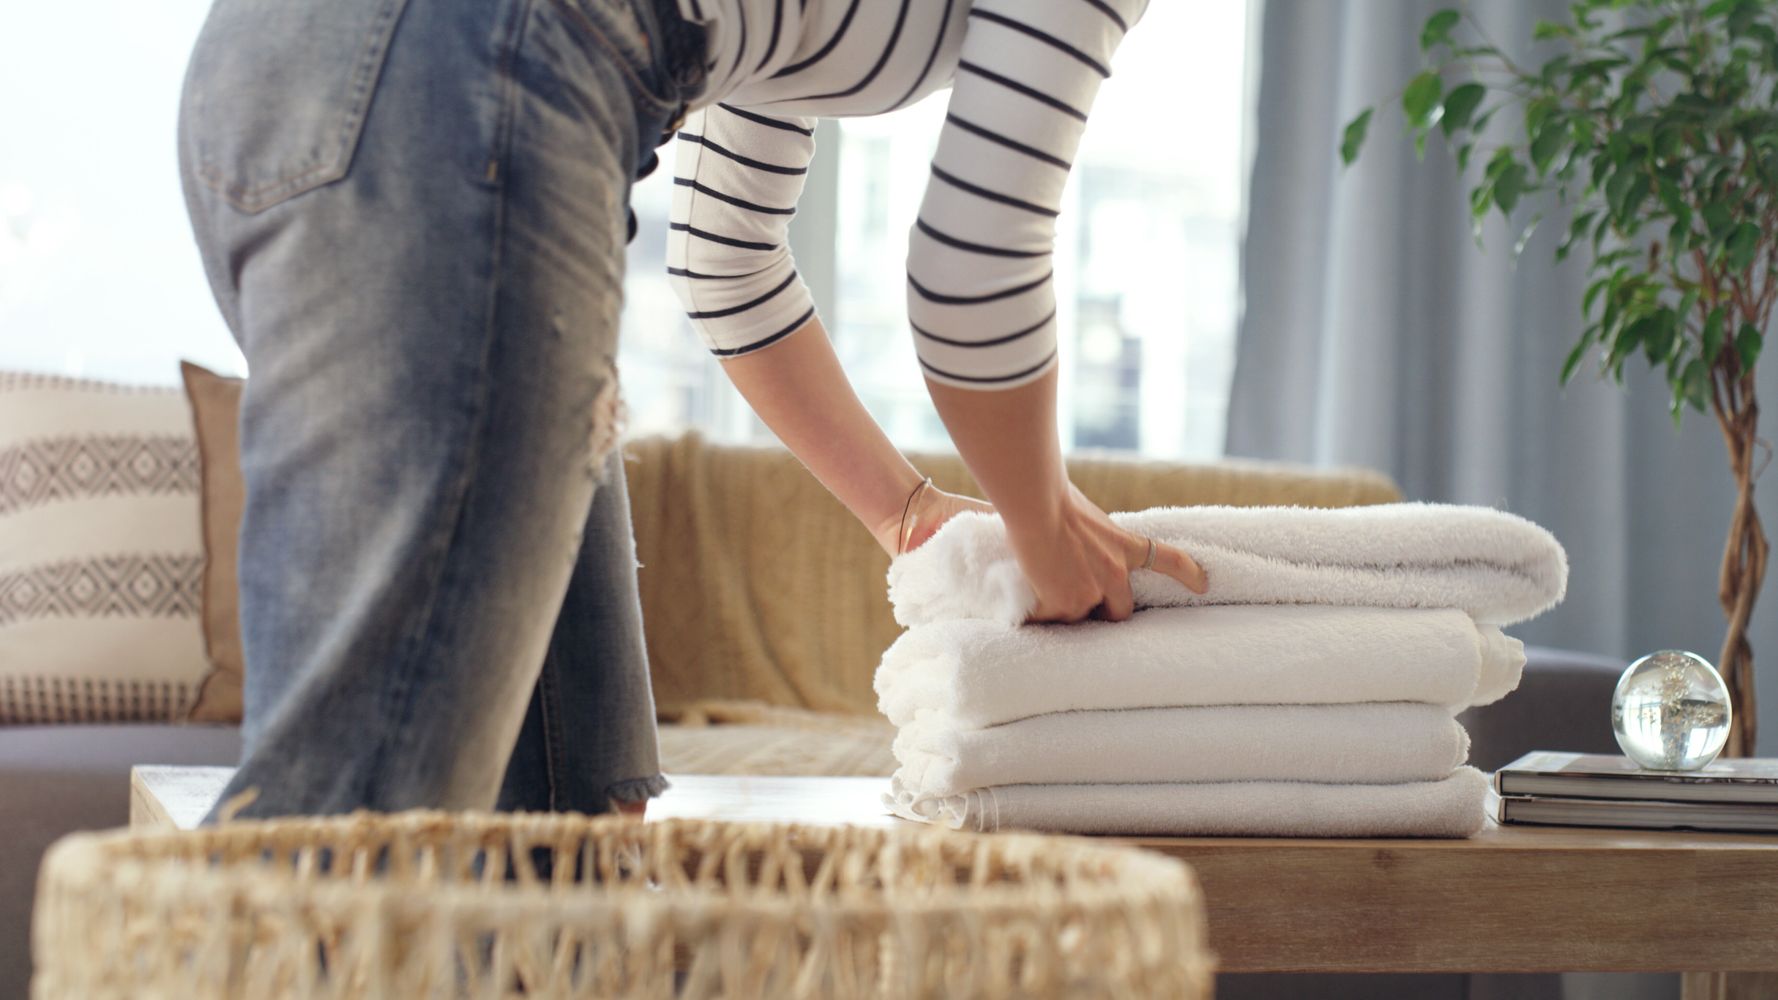 The $10 Hack That Lets You Dry Clean Your Sweaters at Home